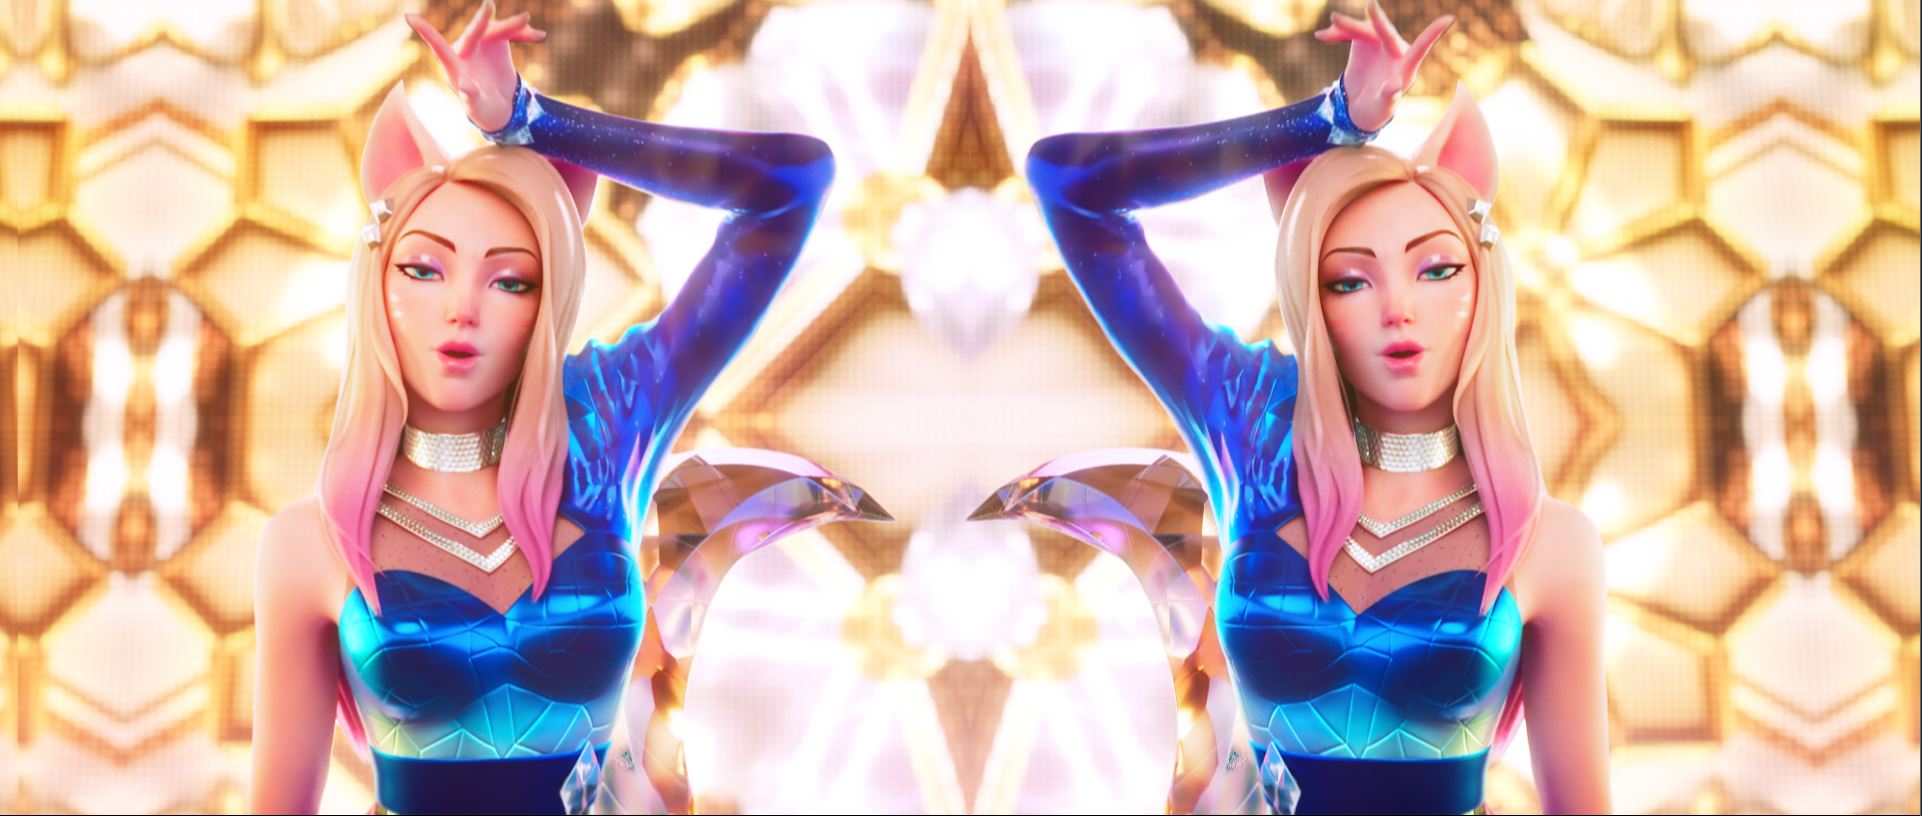 Ahri KDA [ALL OUT] - League of Legends [4K Version] (Wallpaper Engine) on  Make a GIF